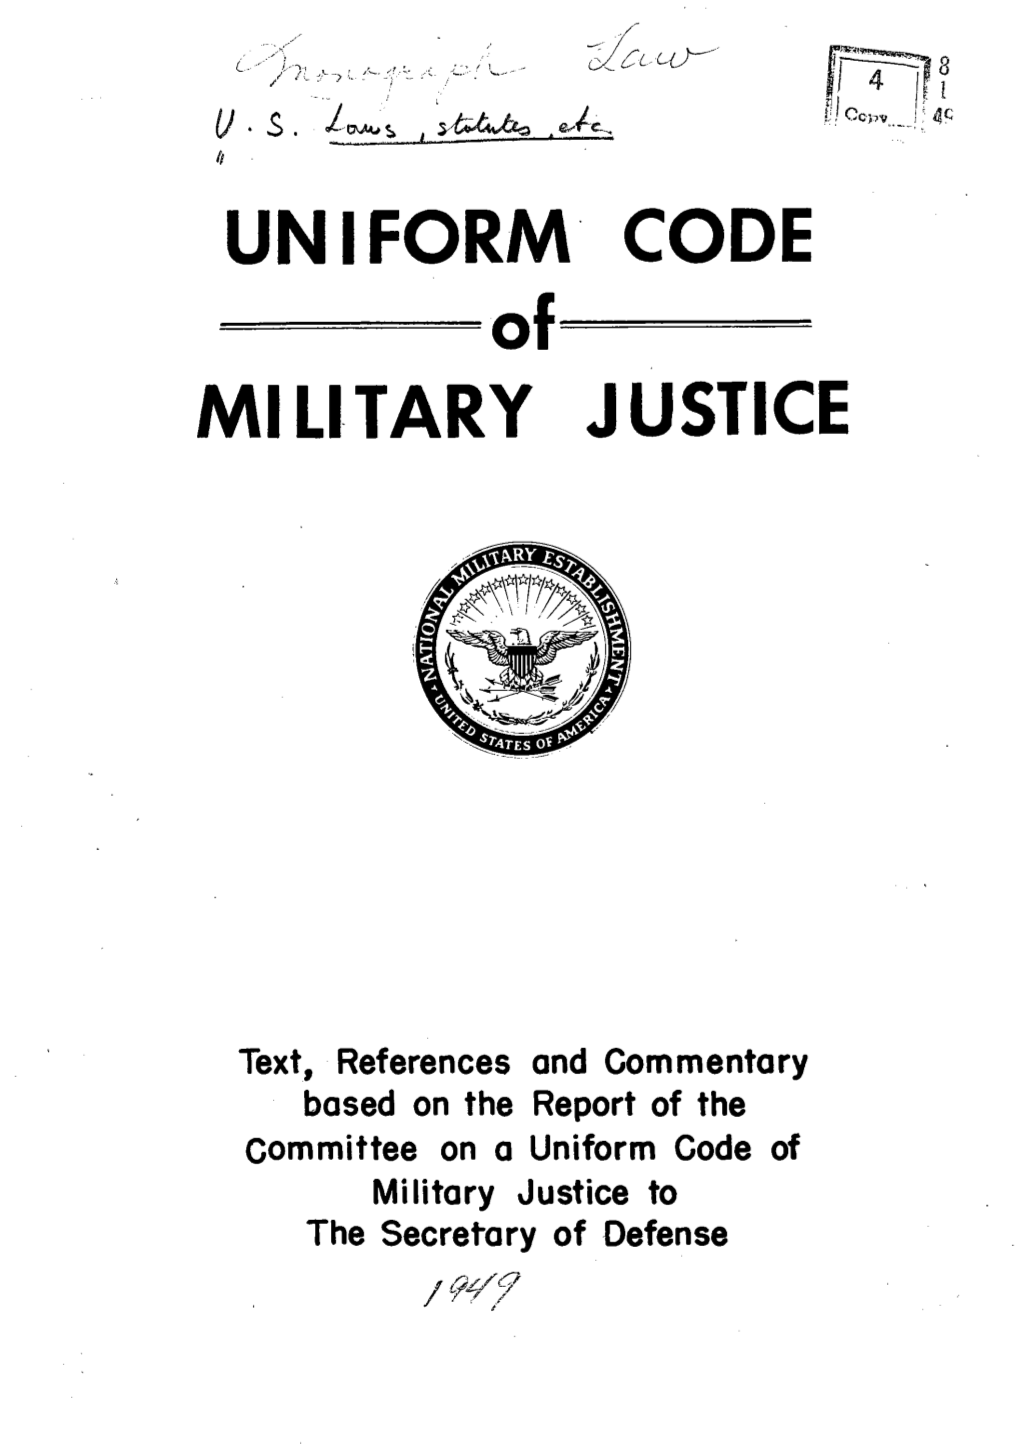 Uniform Code of Military Justice to the Secretary of Defense MEMBERS of the COMMITTEE on a UNIFORM CODE of MILITARY JUSTICE and ITS STAFF